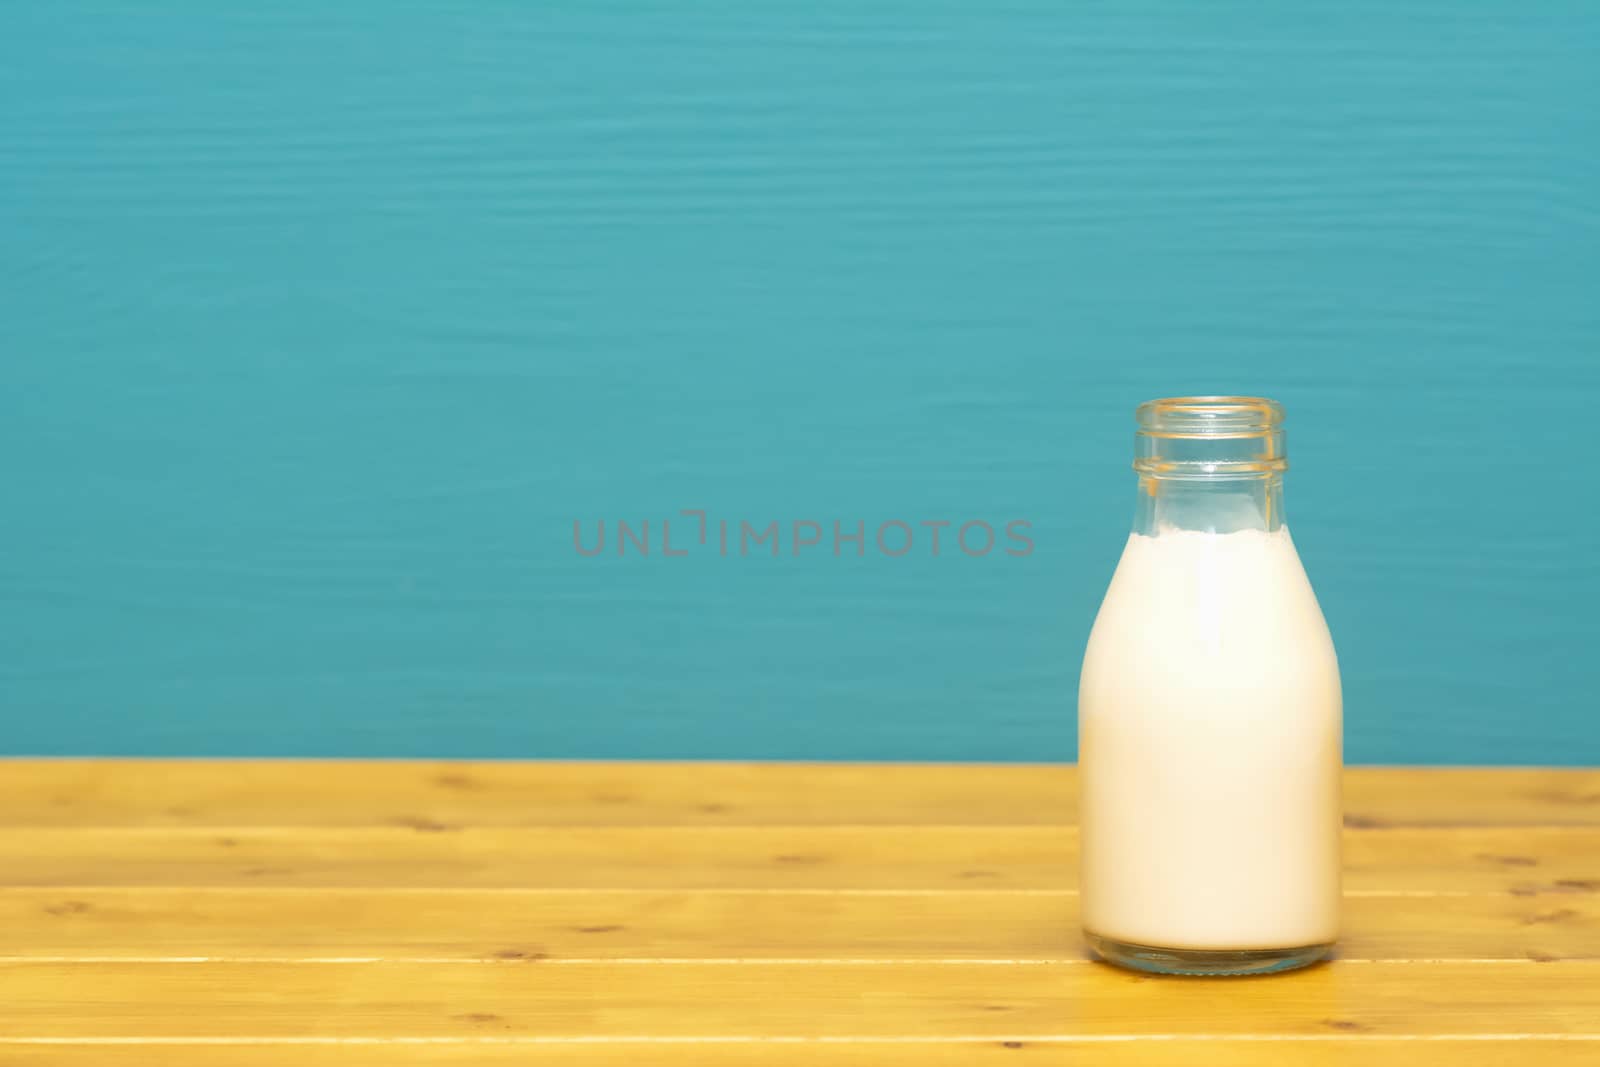 Fresh creamy milk in a one-third pint glass milk bottle, on a wooden table against a bright teal painted background